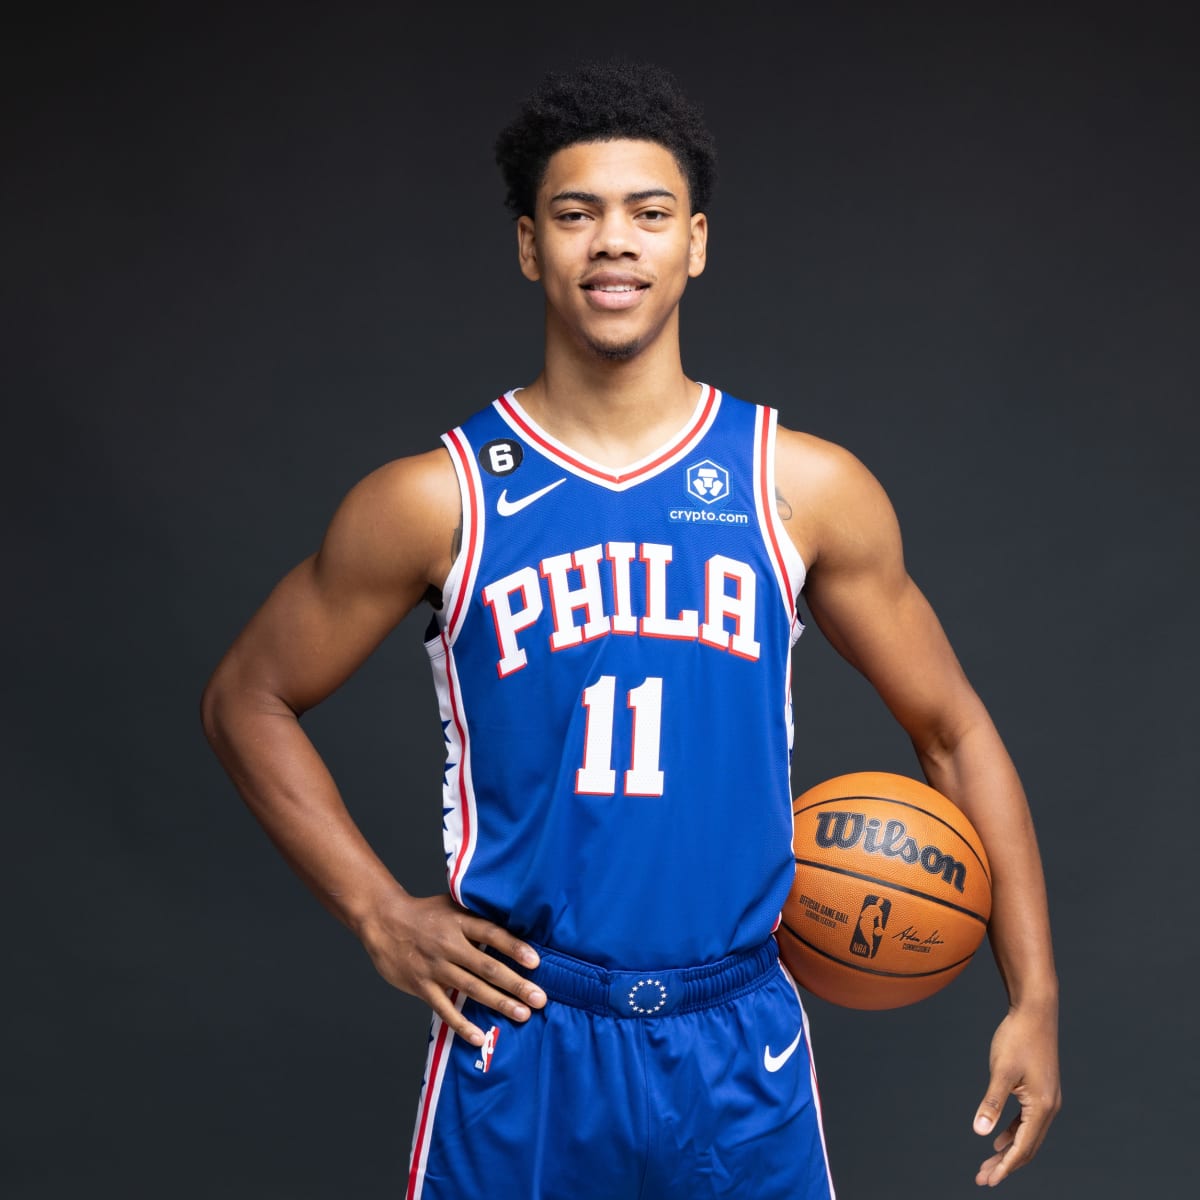 NBA Buzz - The Sixers' G-League affiliate, the Delaware 87ers wore